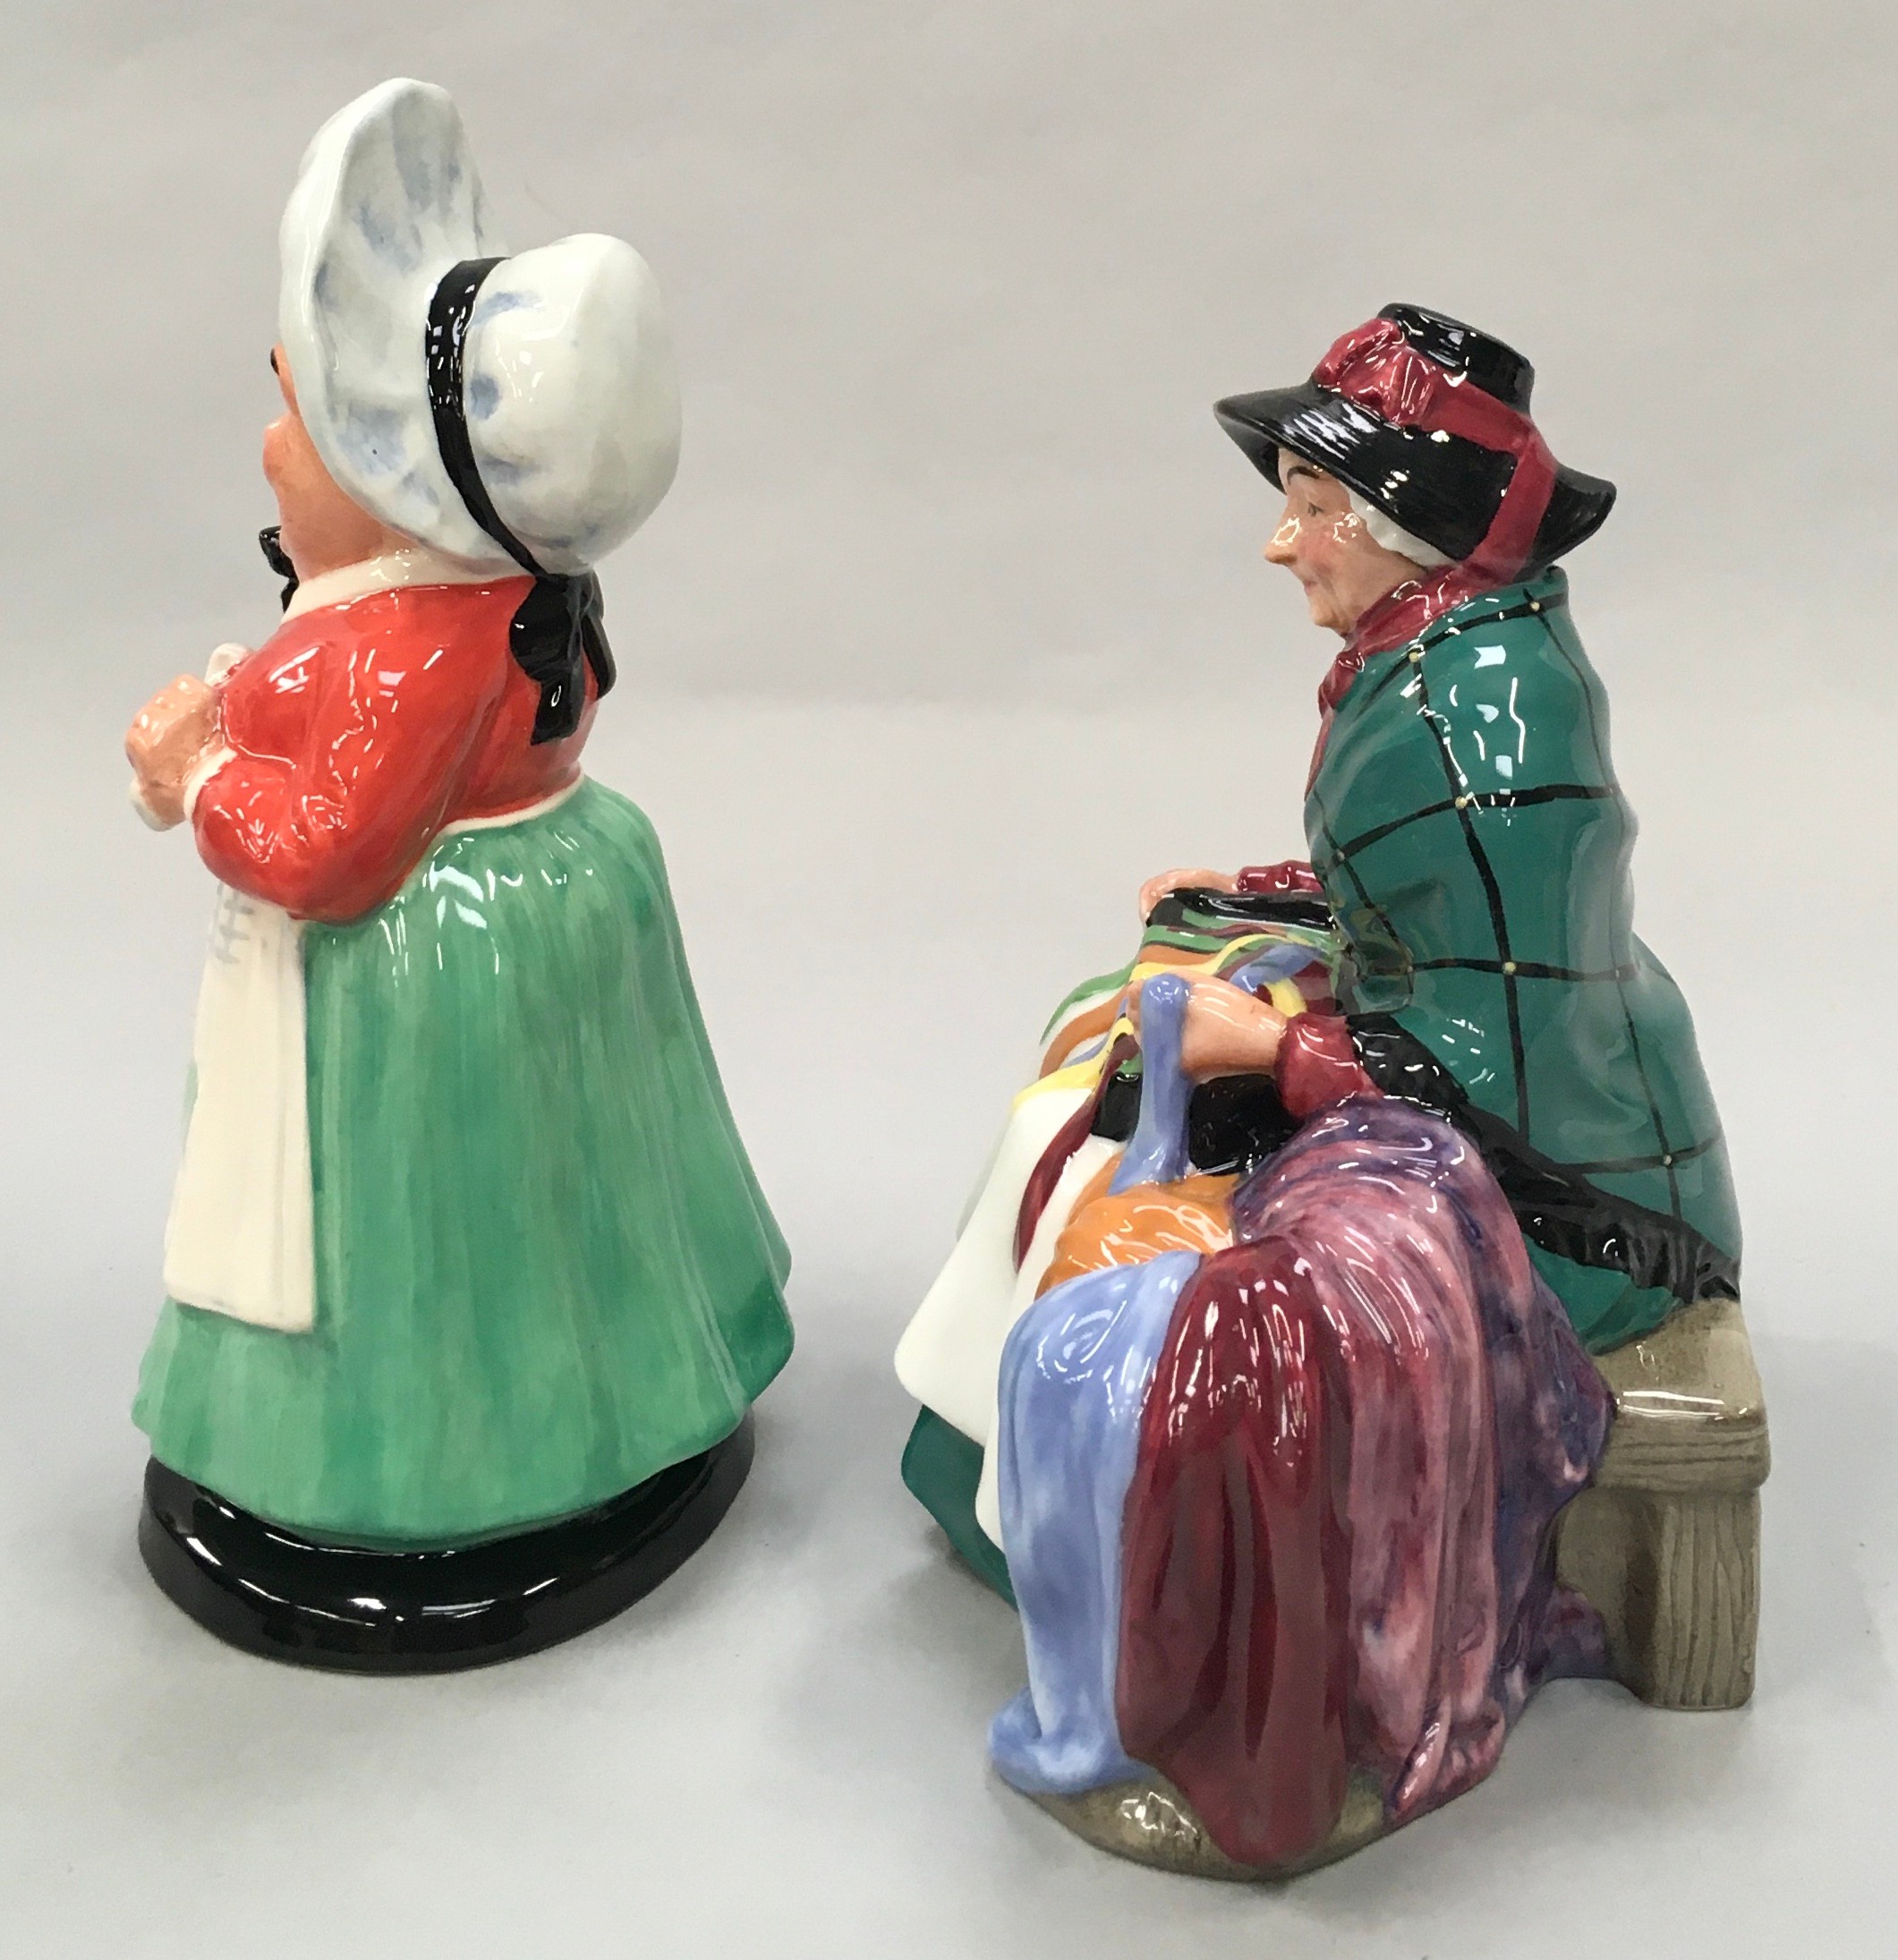 Royal Doulton Figurine Silks and Ribbons HN2017 together with Old Mother Hubbard DNR3, Boxed - Image 3 of 6